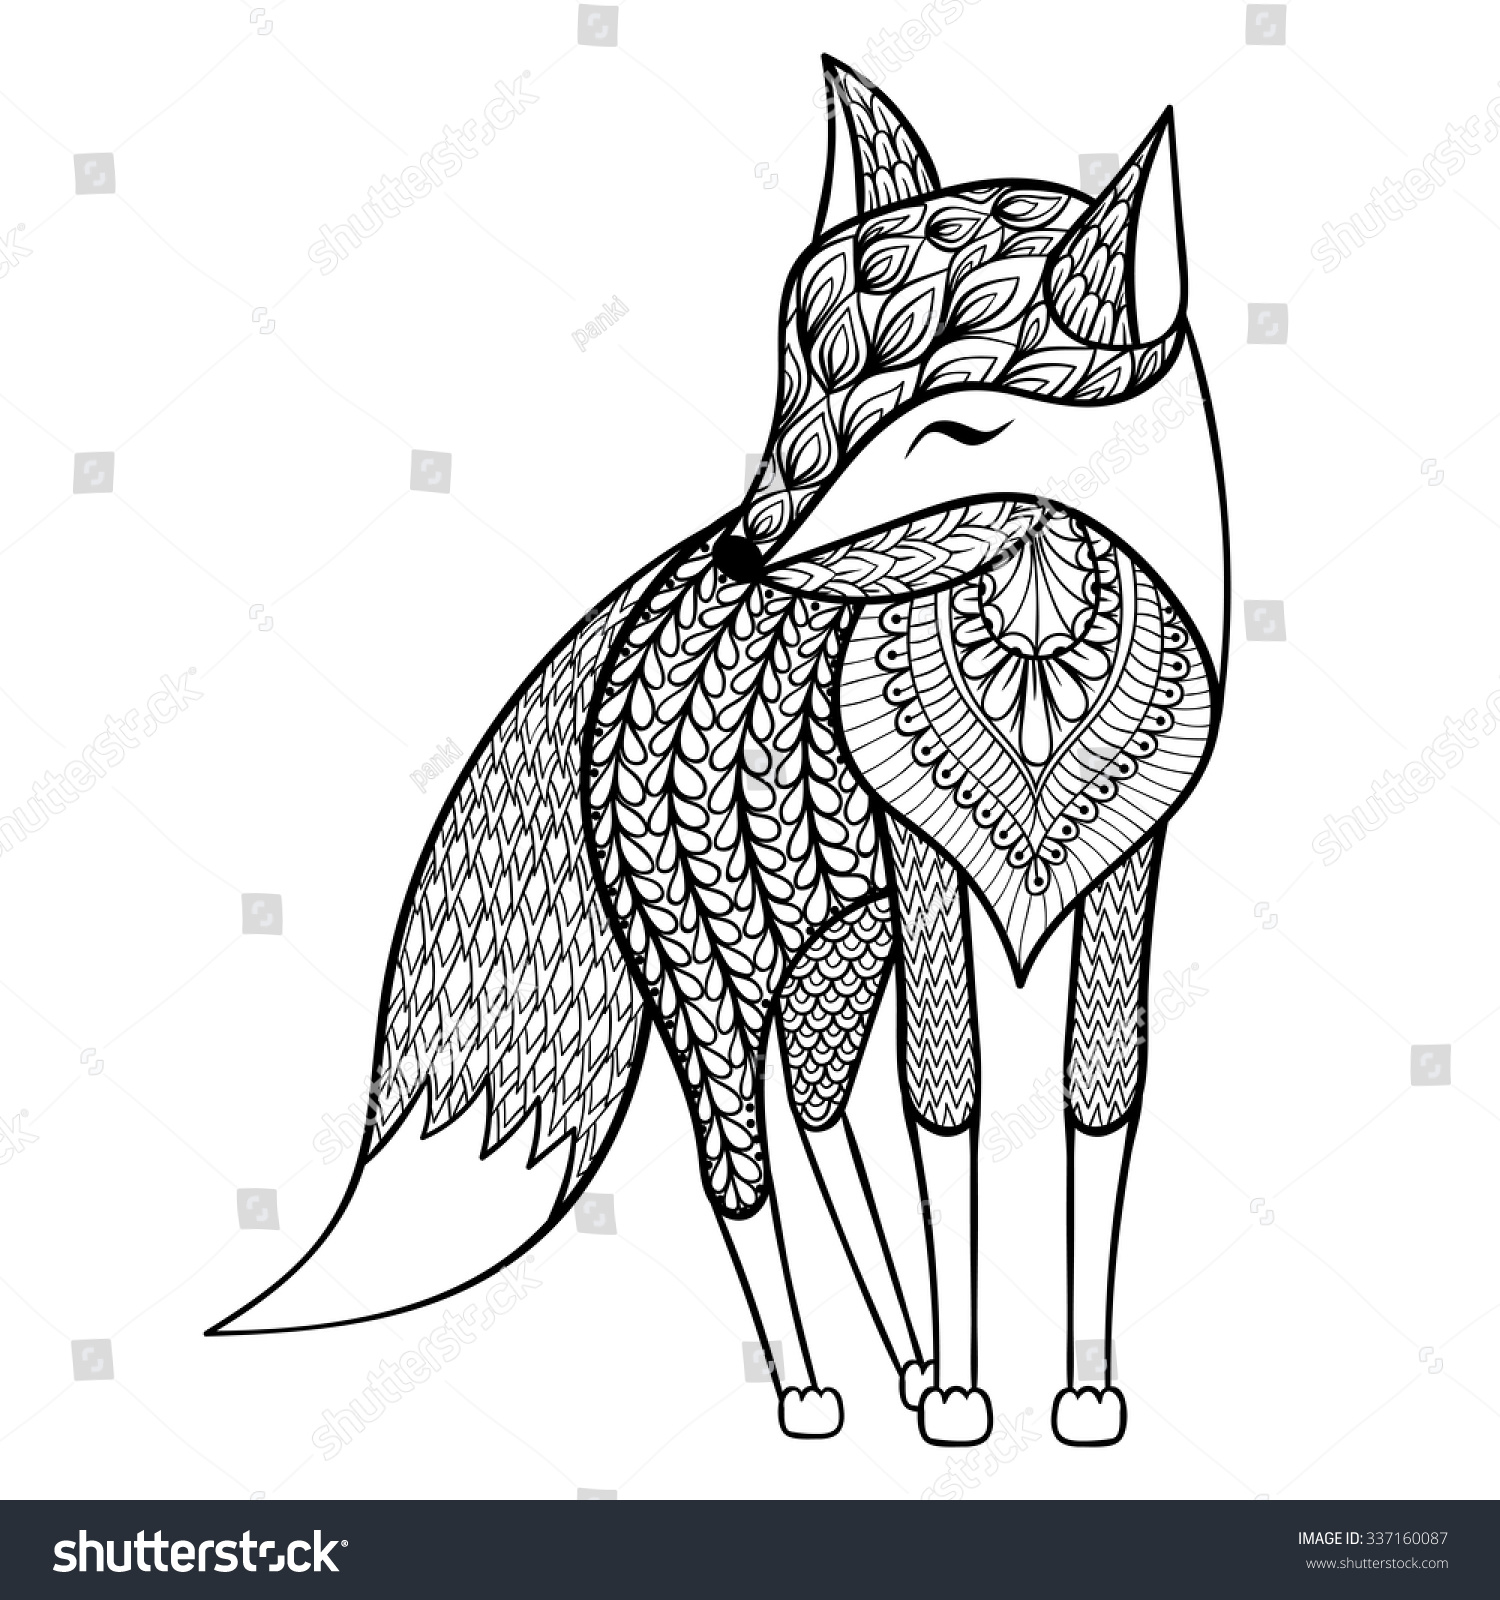 SVG of Zentangle vector happy Fox for adult anti stress coloring pages. Ornamental tribal patterned illustration for tattoo, poster, print. Hand drawn  sketch isolated on white background. Animal collection. svg